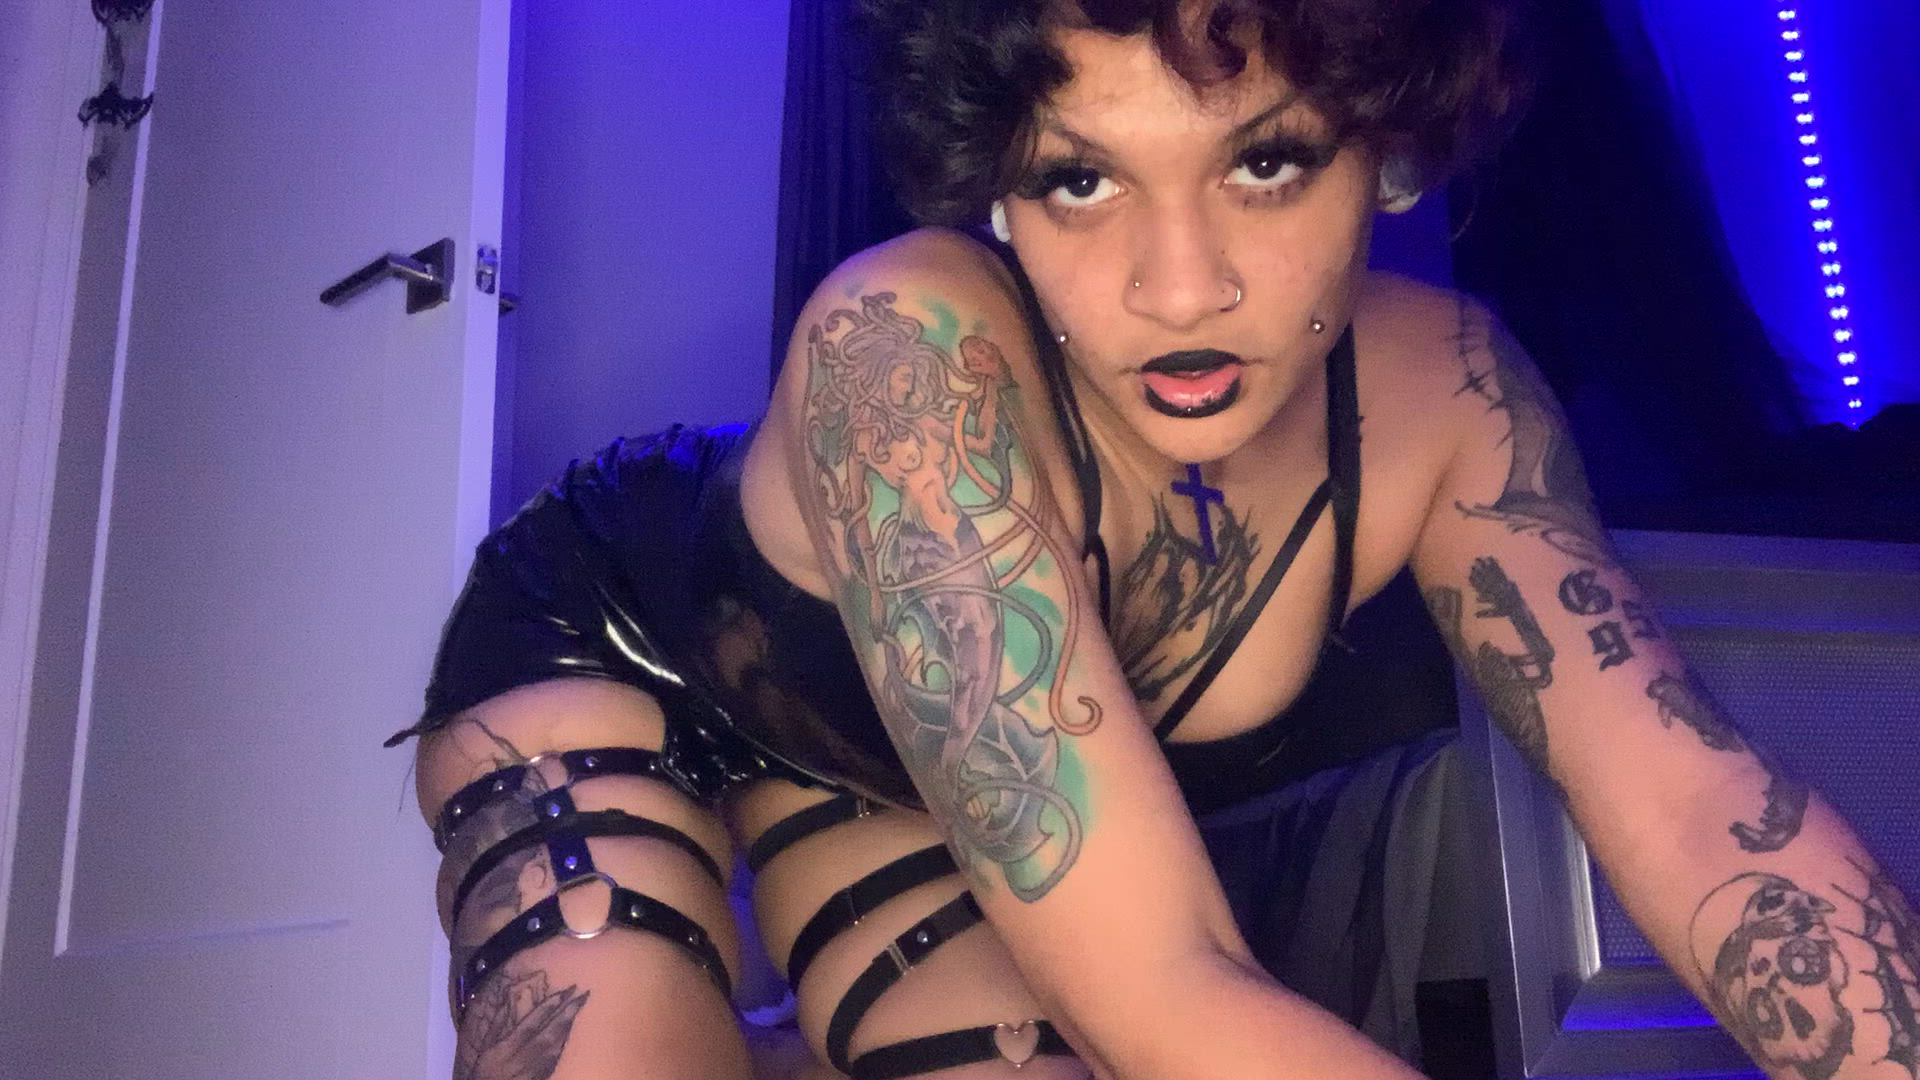 Ass porn video with onlyfans model poisonivy666 <strong>@poison_ivy666</strong>